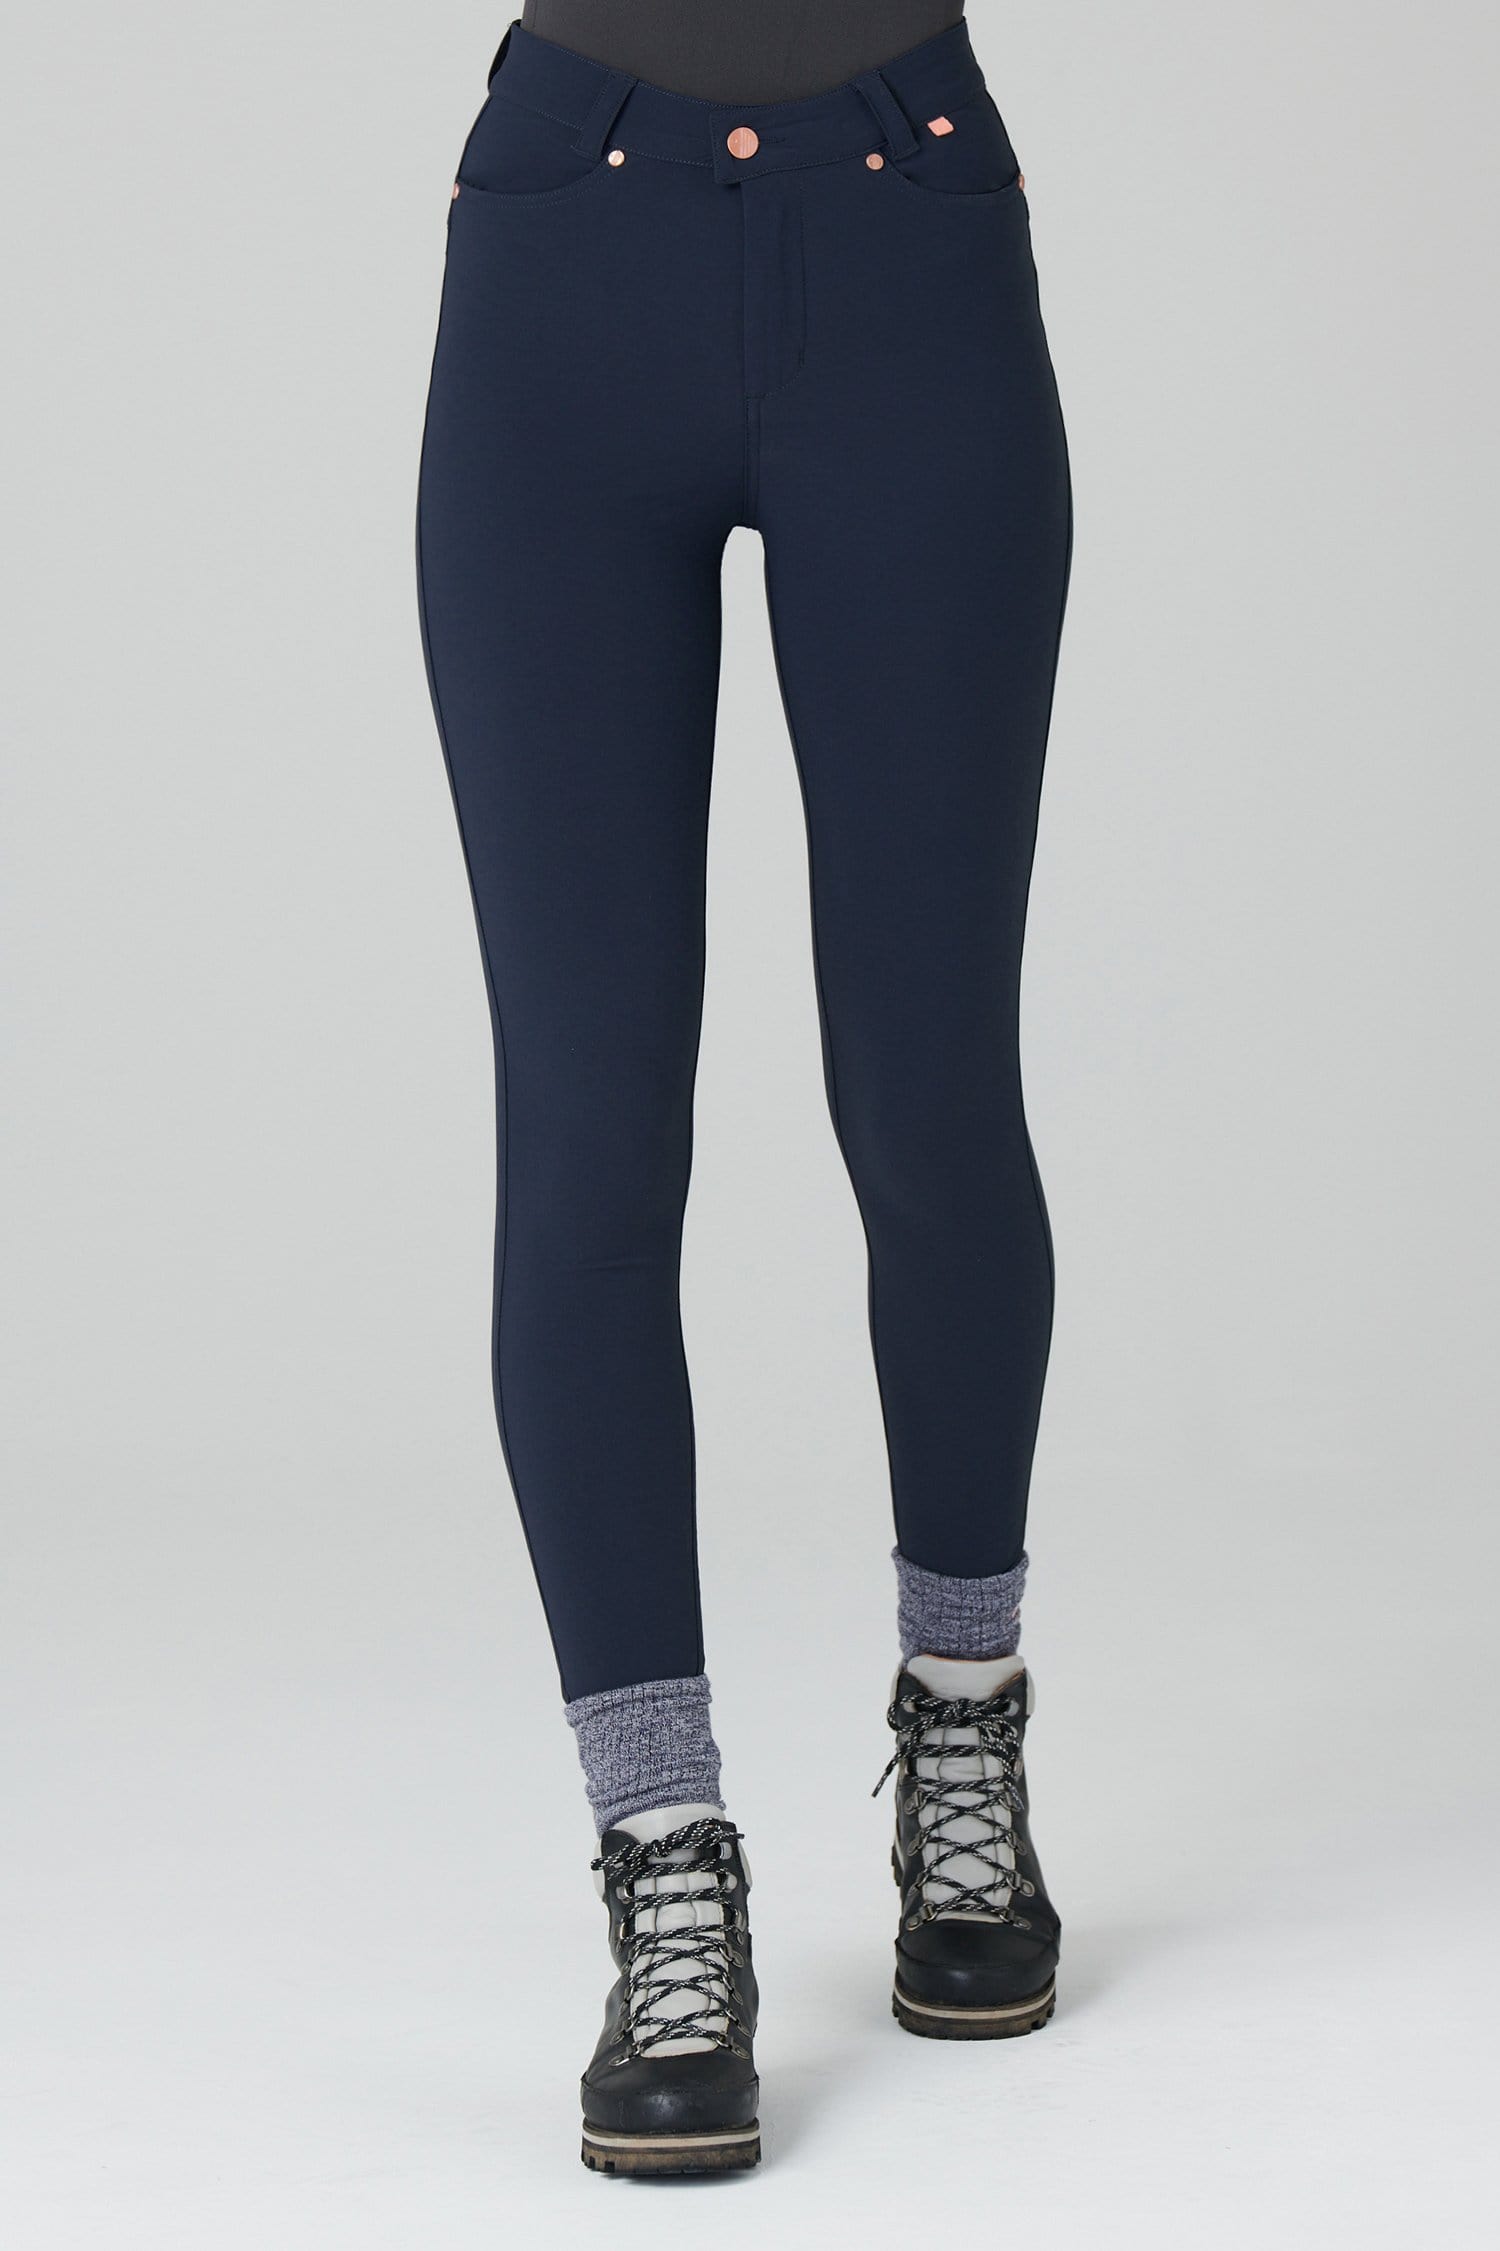 Thermal Skinny Outdoor Trousers - Deep Navy - 28r / Uk10 - Womens - Acai Outdoorwear